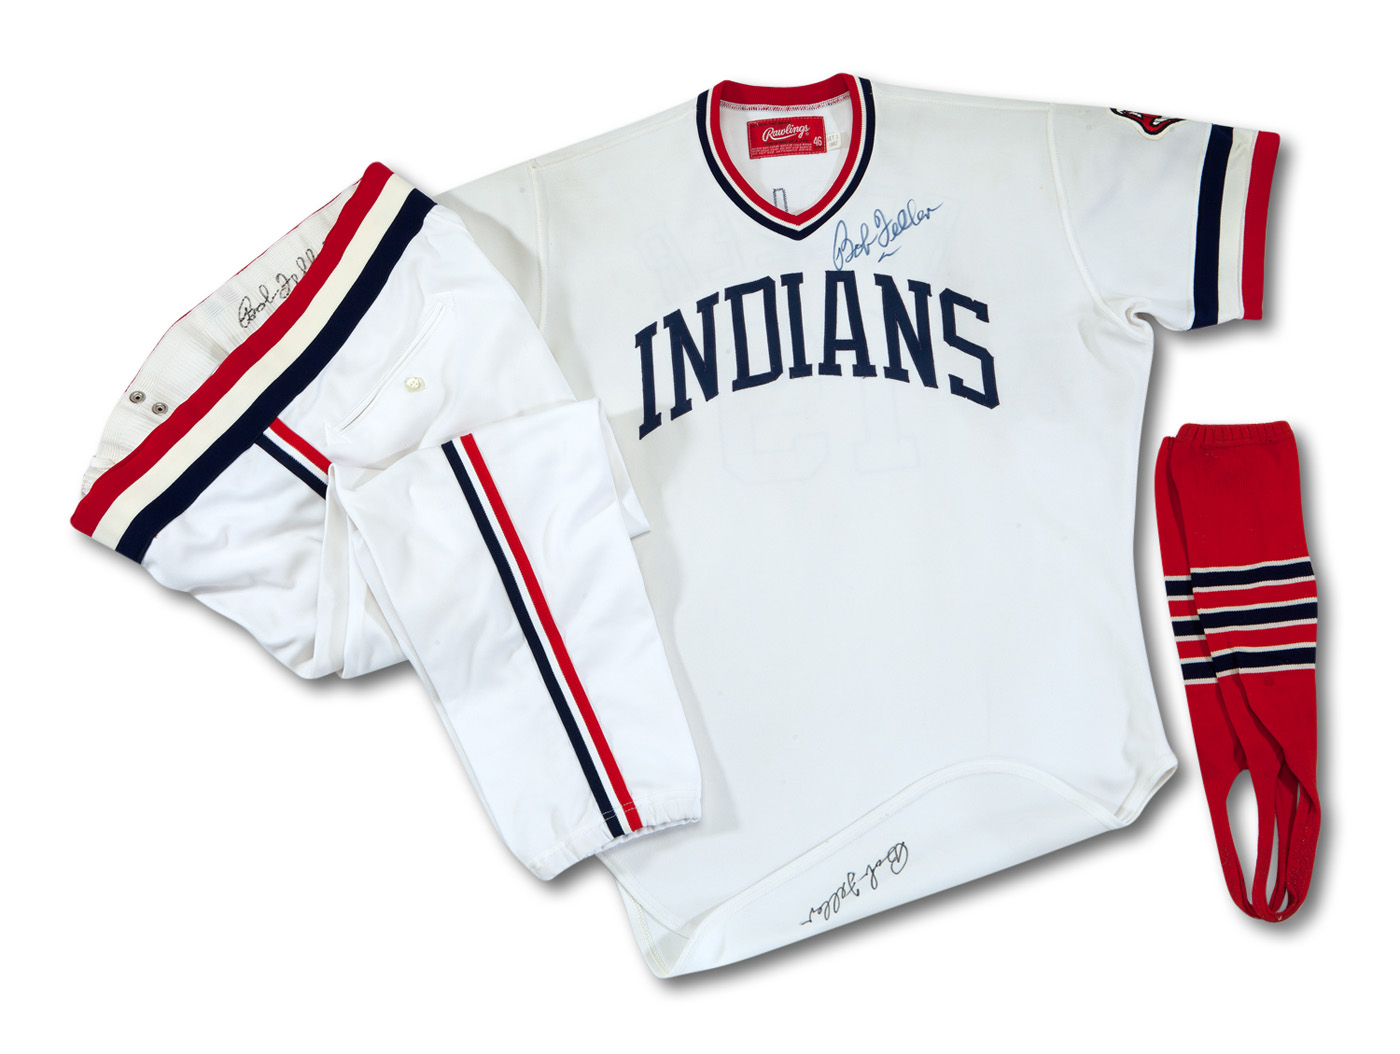 1980's cleveland indians jersey